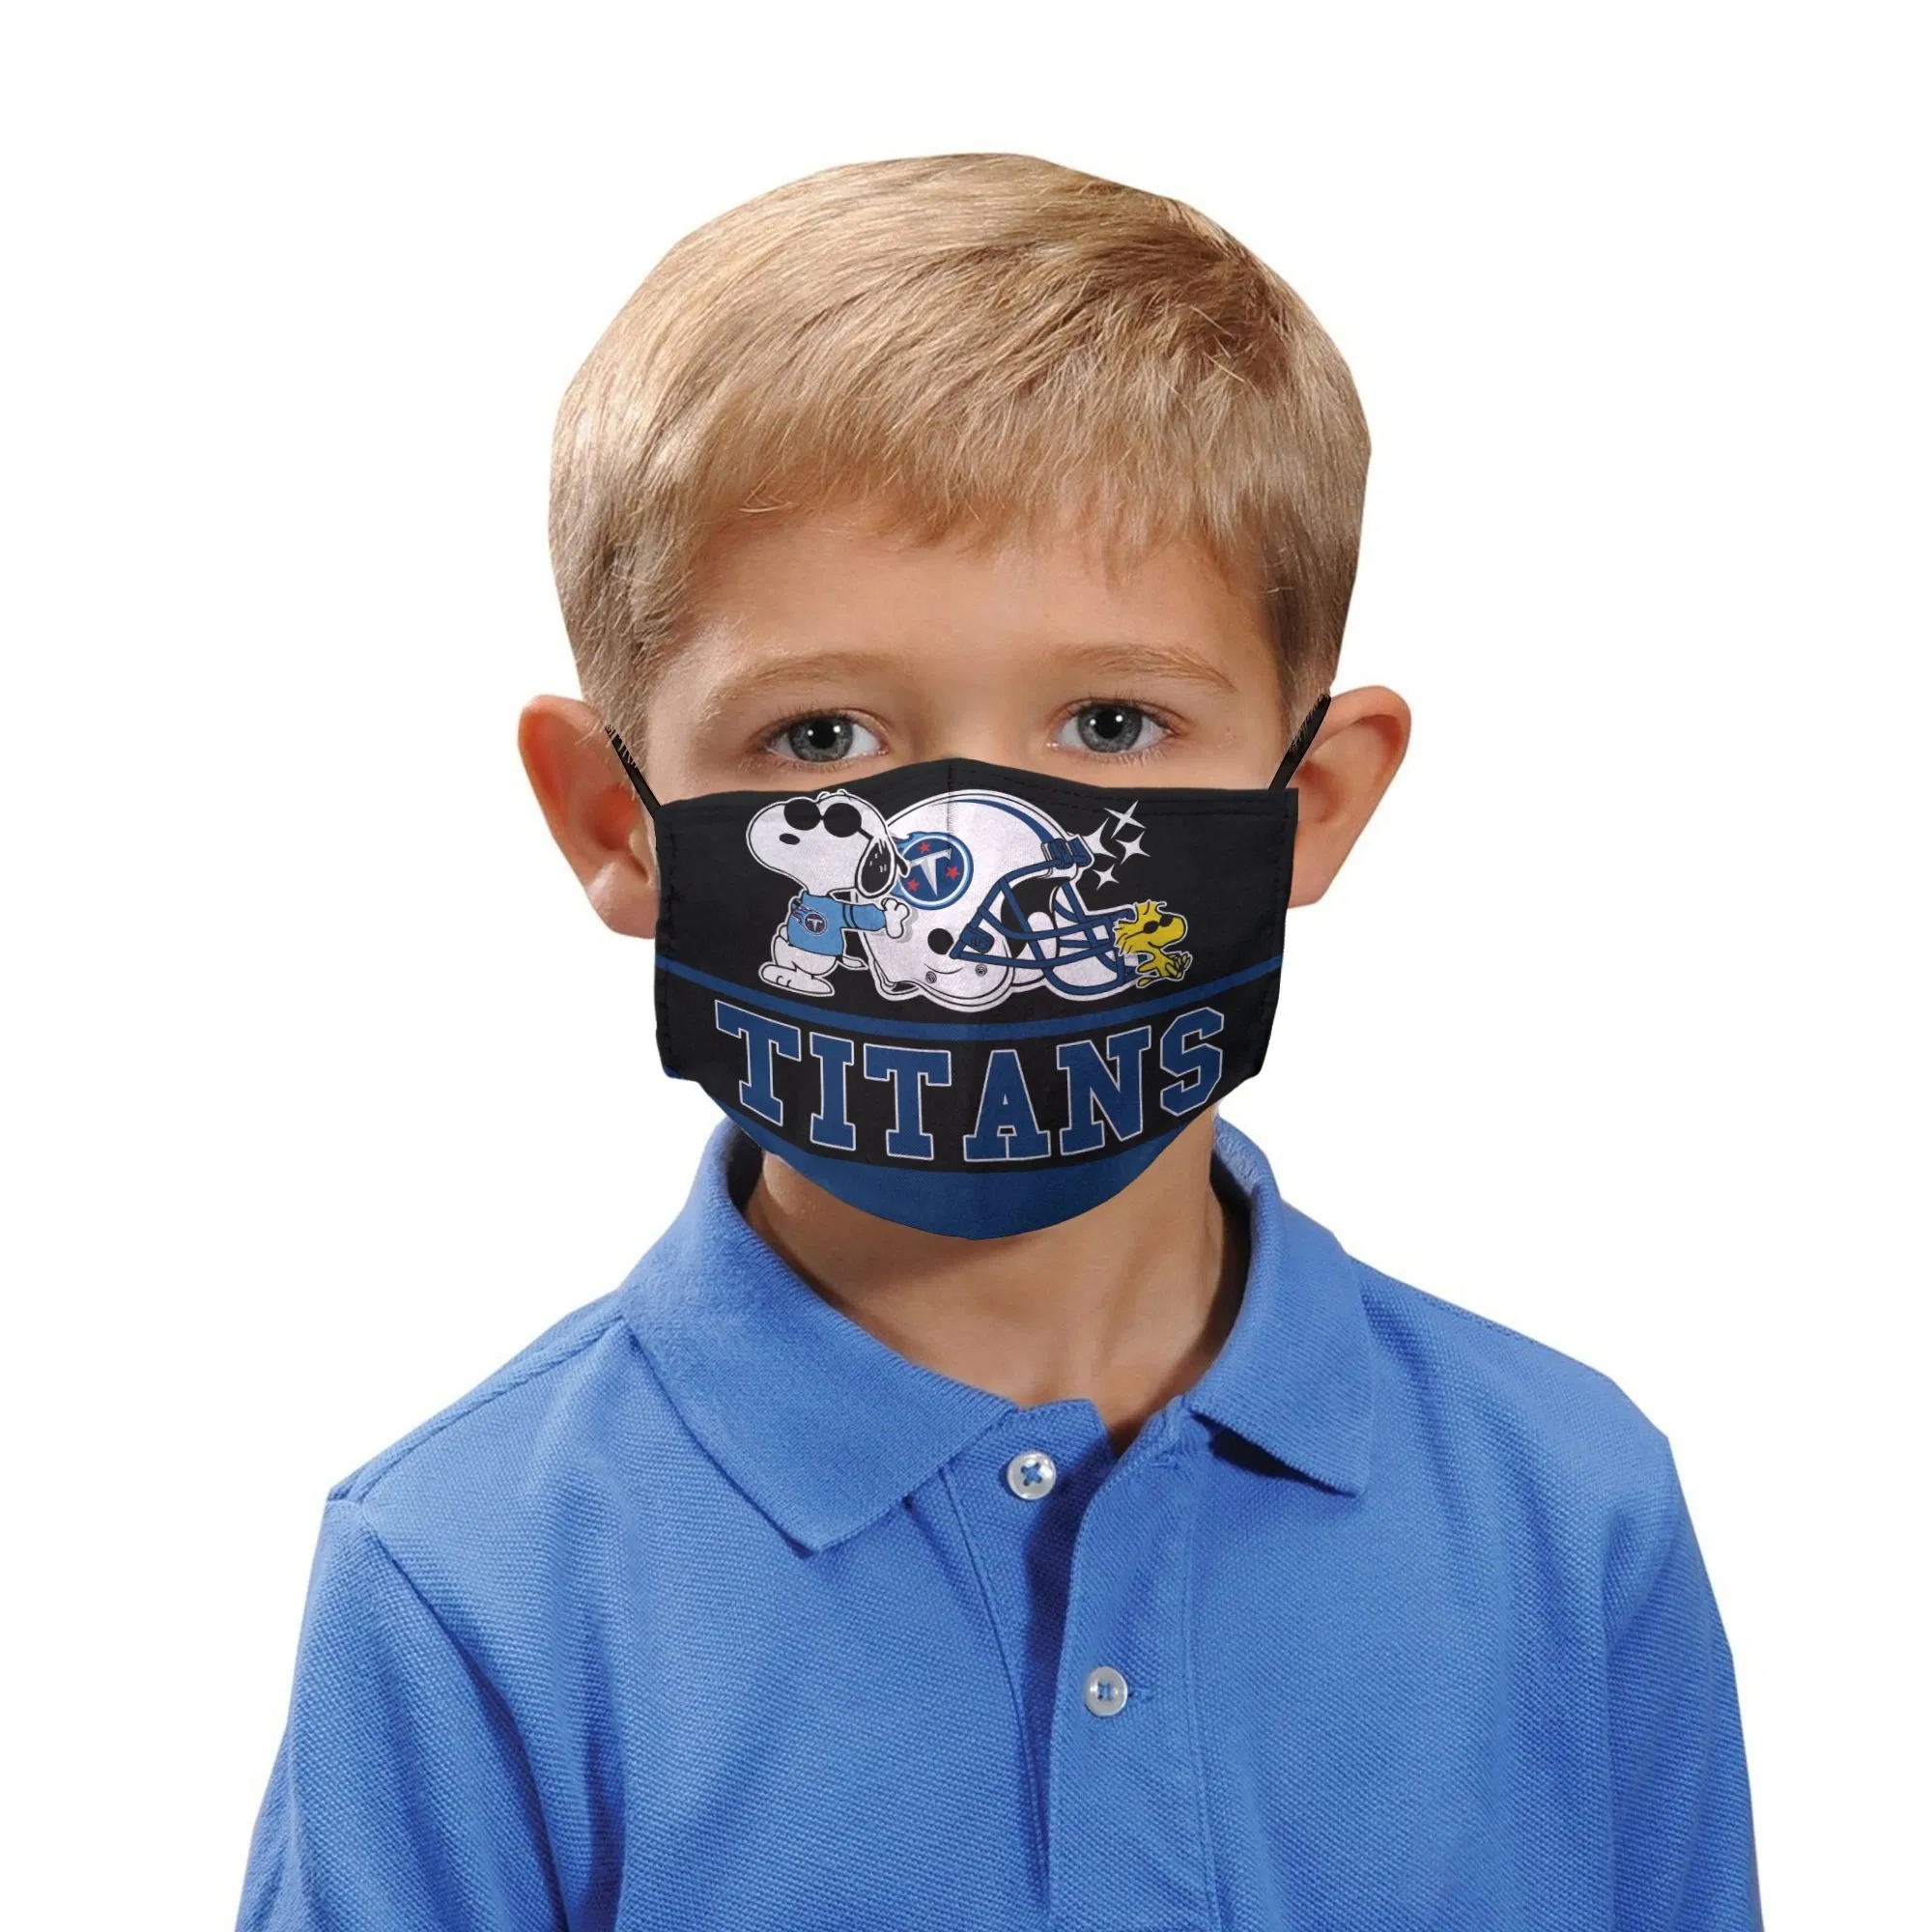 What Are Explanations Why A Facemask May Possibly Causes A Blood Pressure Or Heart Trend? 2